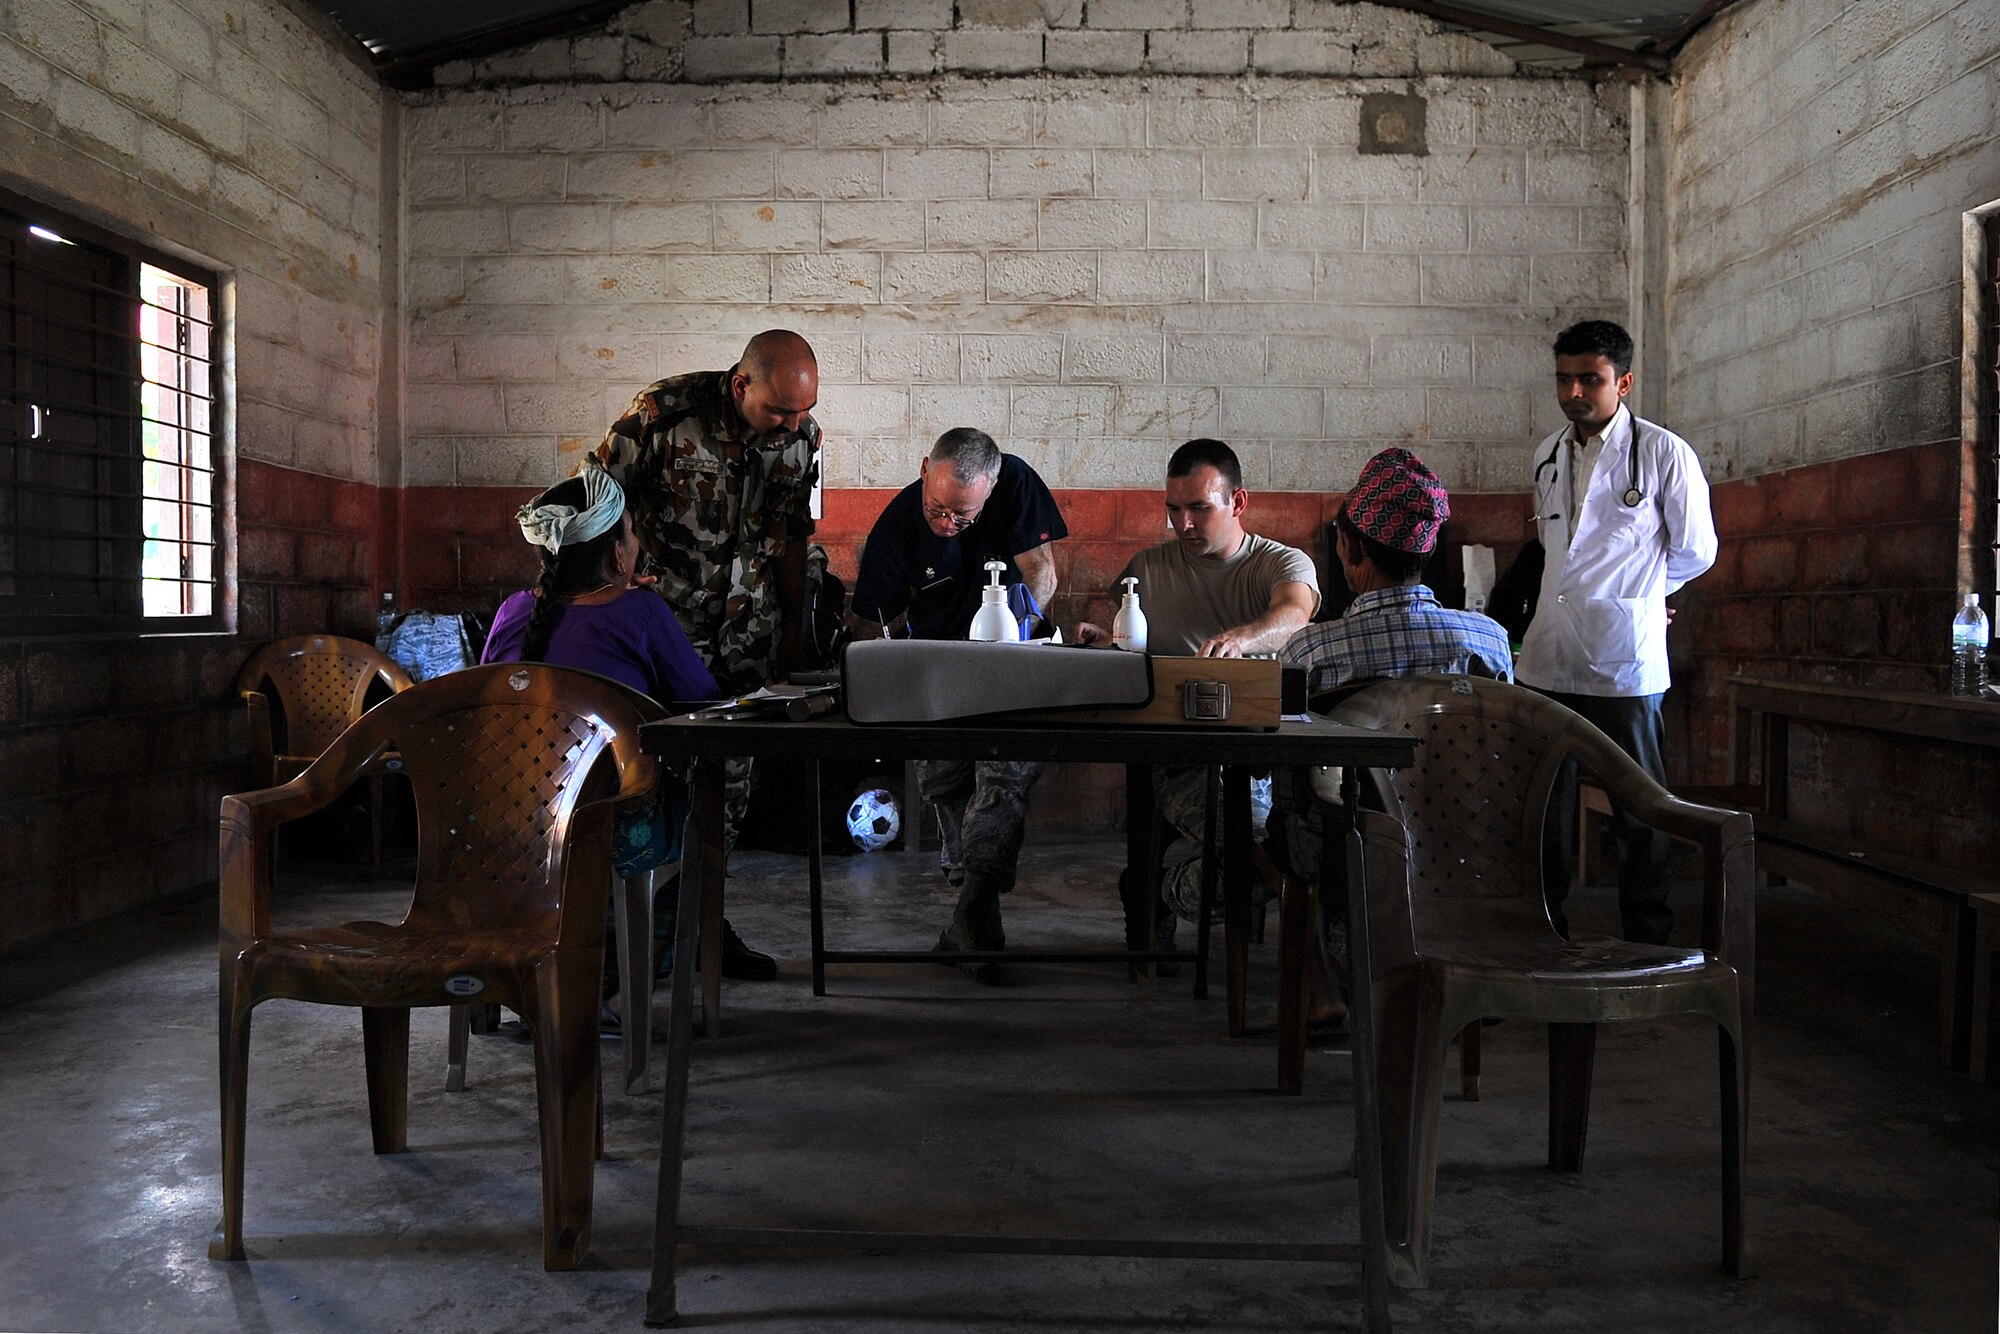 U.S. Air Force and Nepalese optometrists assess patients as part of Operation Pacific Angel-Nepal at a health services outreach location in Manahari, Nepal, Sept. 8, 2014. PACANGEL helps cultivate common bonds and foster goodwill between the U.S., Nepal and regional nations by conducting multilateral humanitarian assistance and civil military operations. (U.S. Air Force photo by Staff Sgt. Melissa B. White/Released)